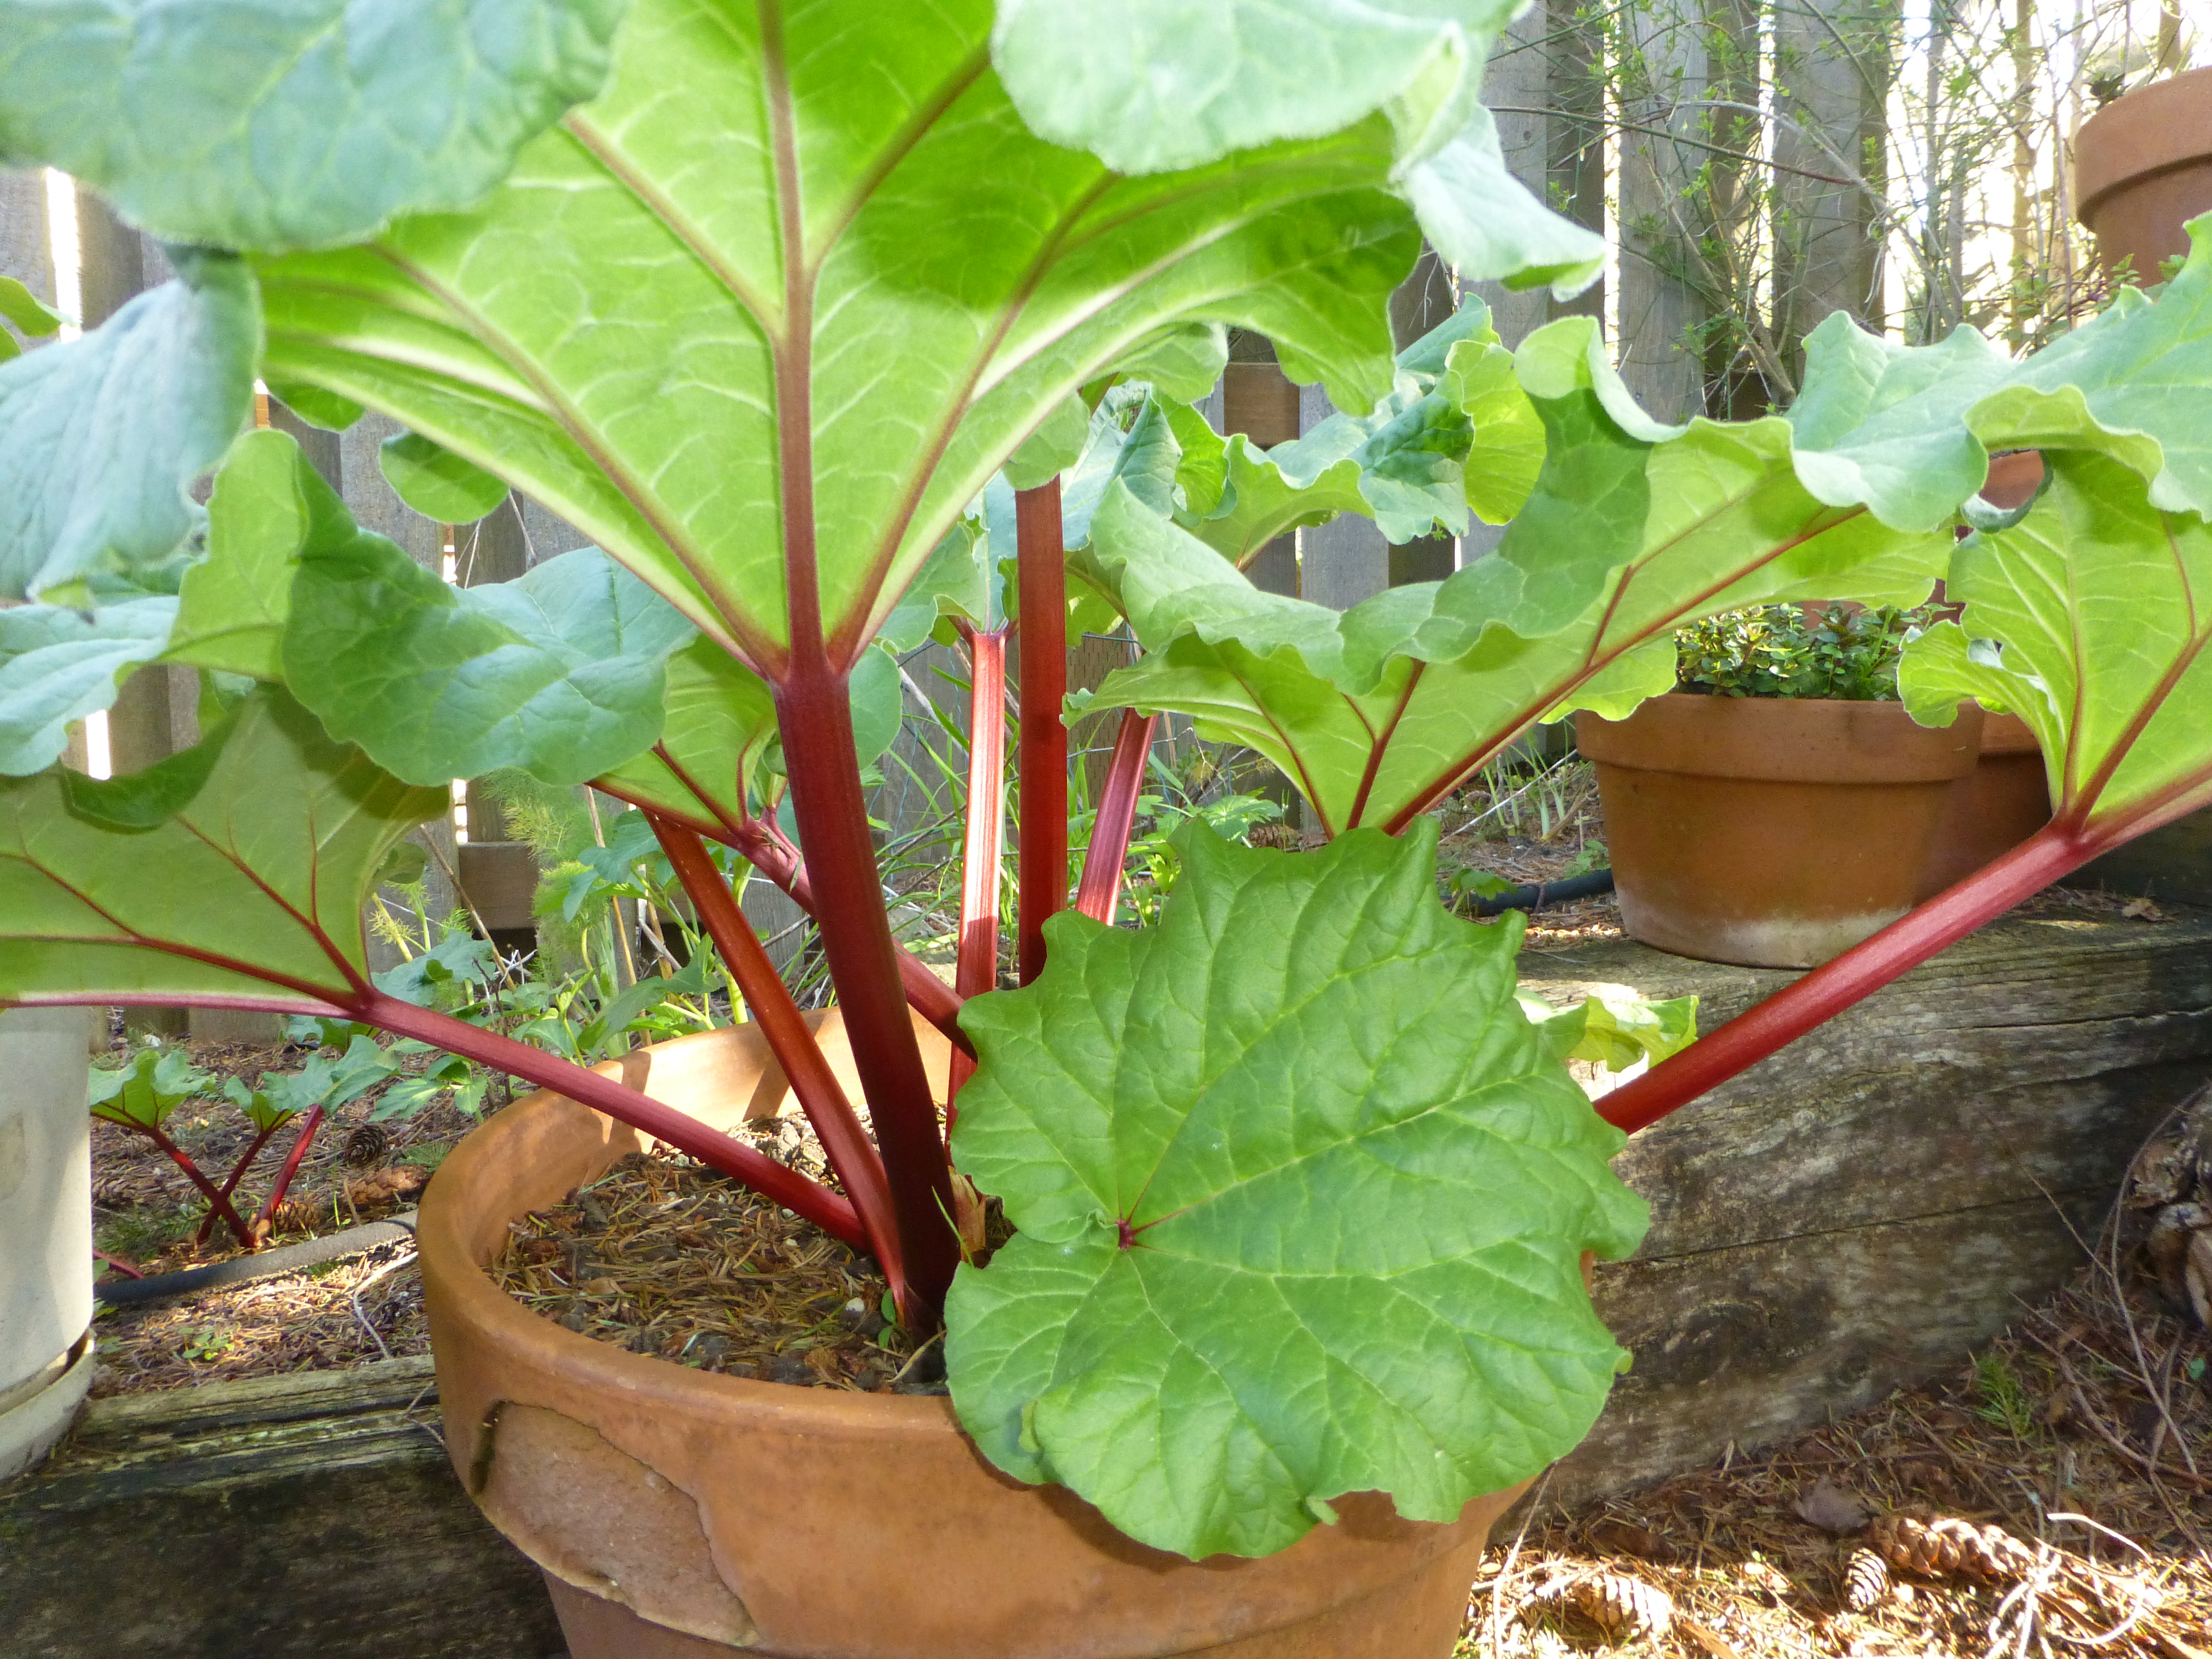 Growing Rhubarb is possible wherever you live!